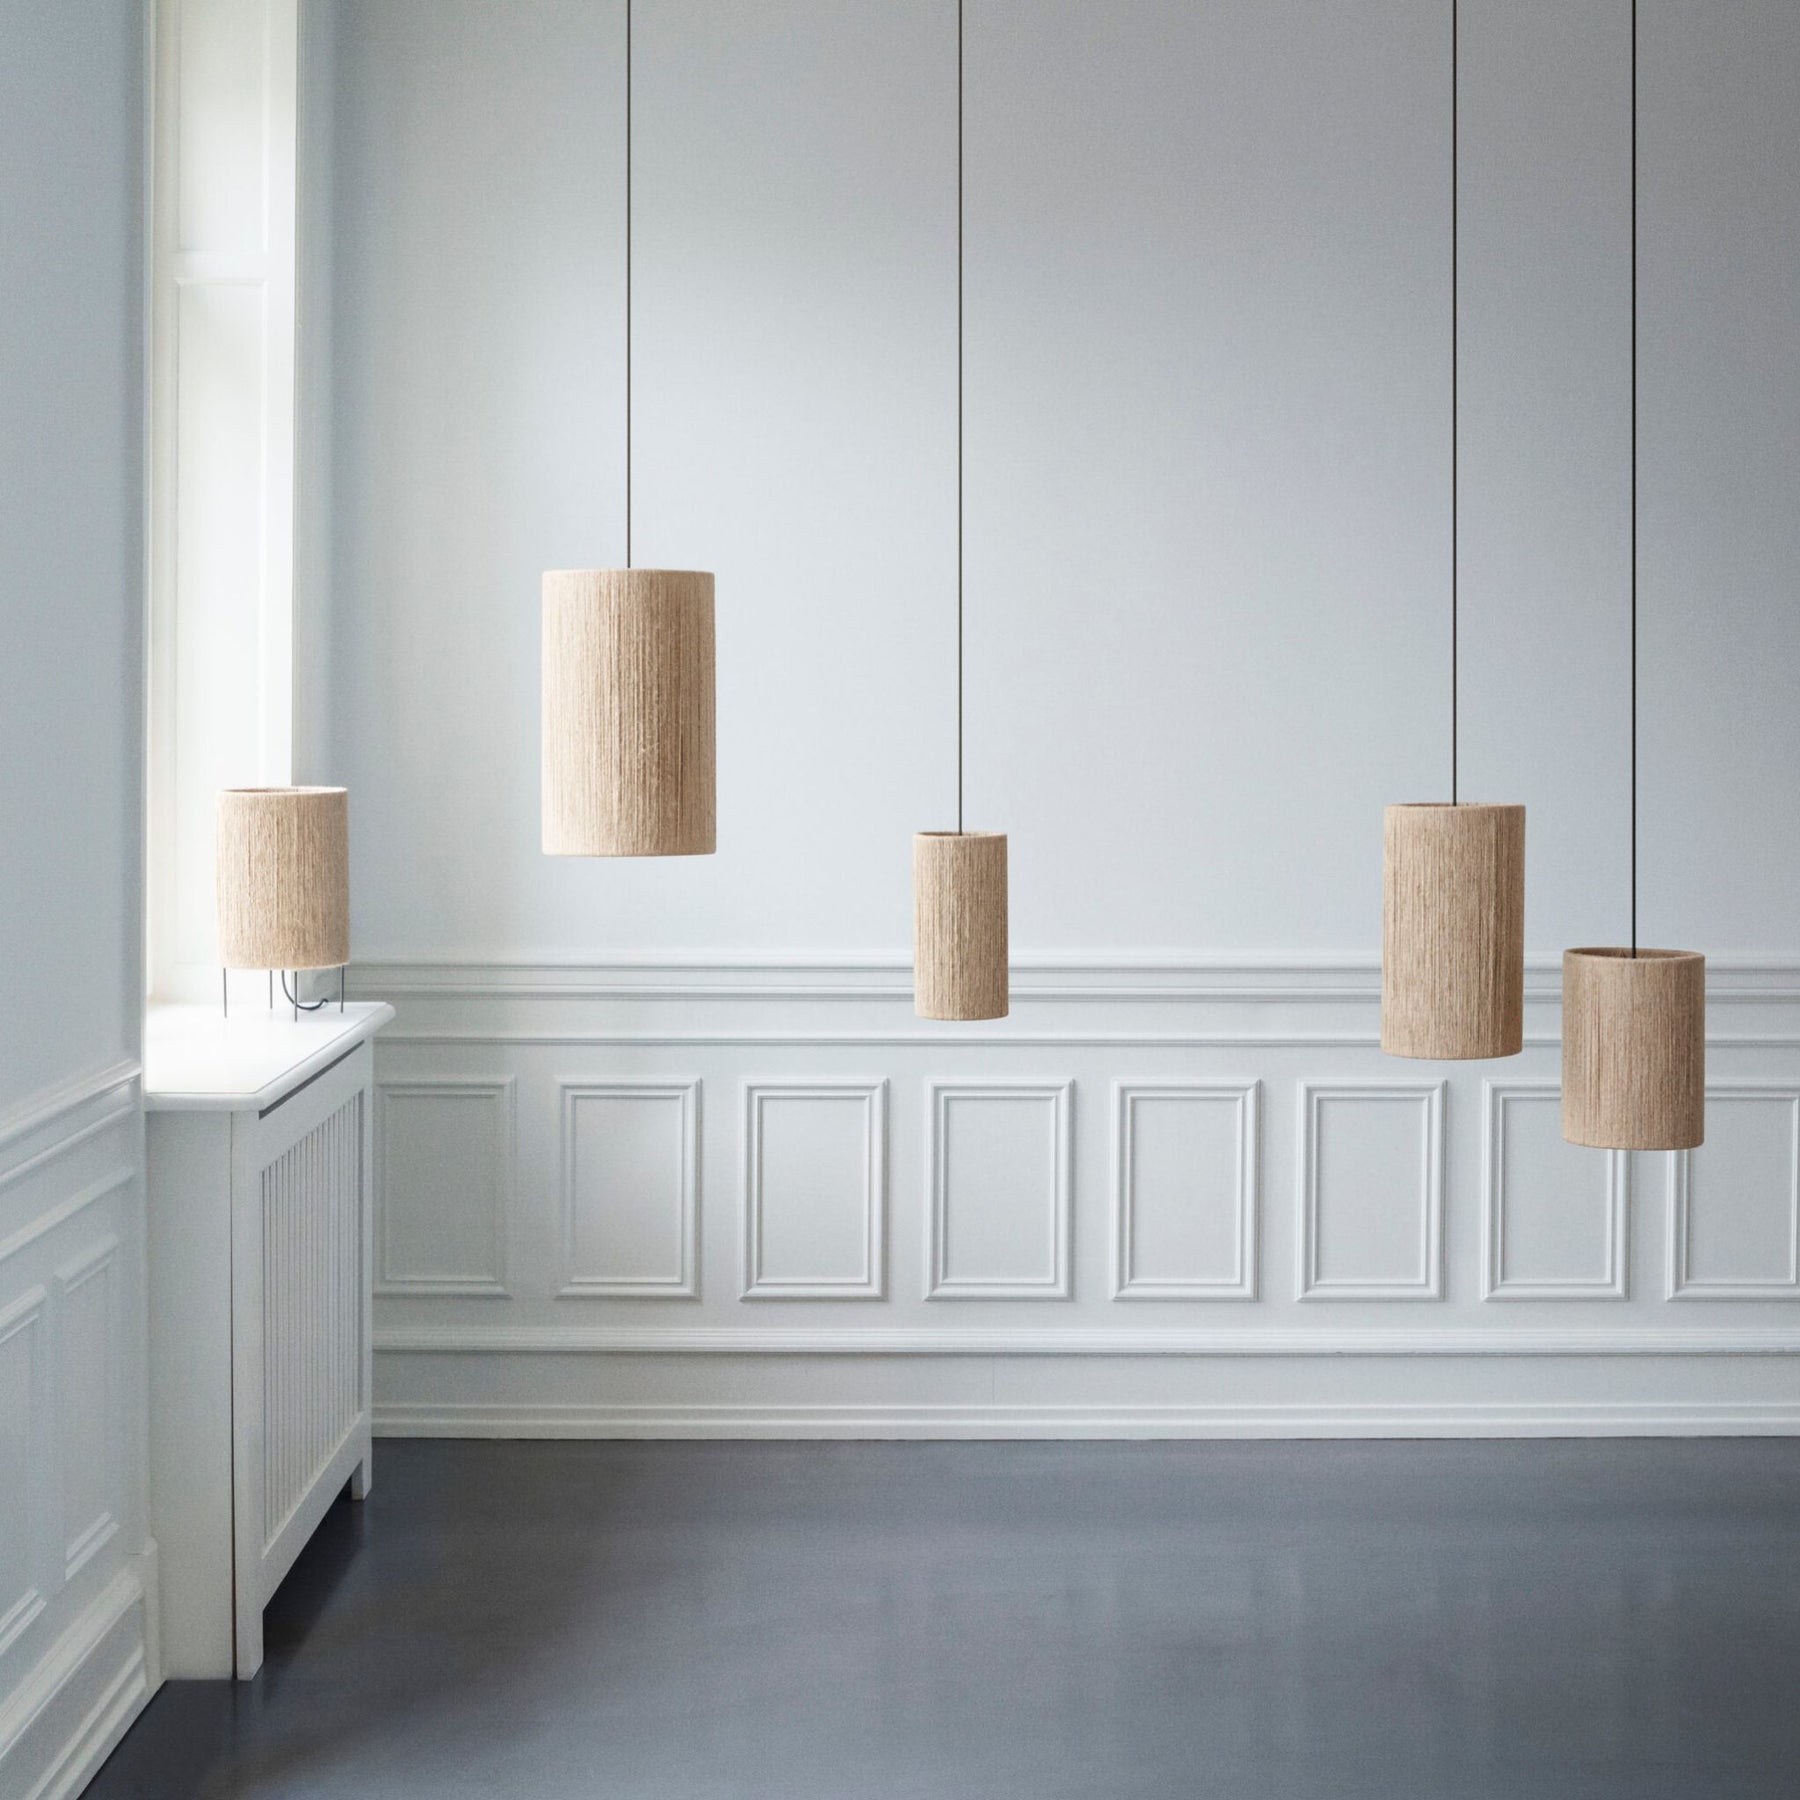 Made by Hand RO Pendant Lamp Collection by Kim Richardt